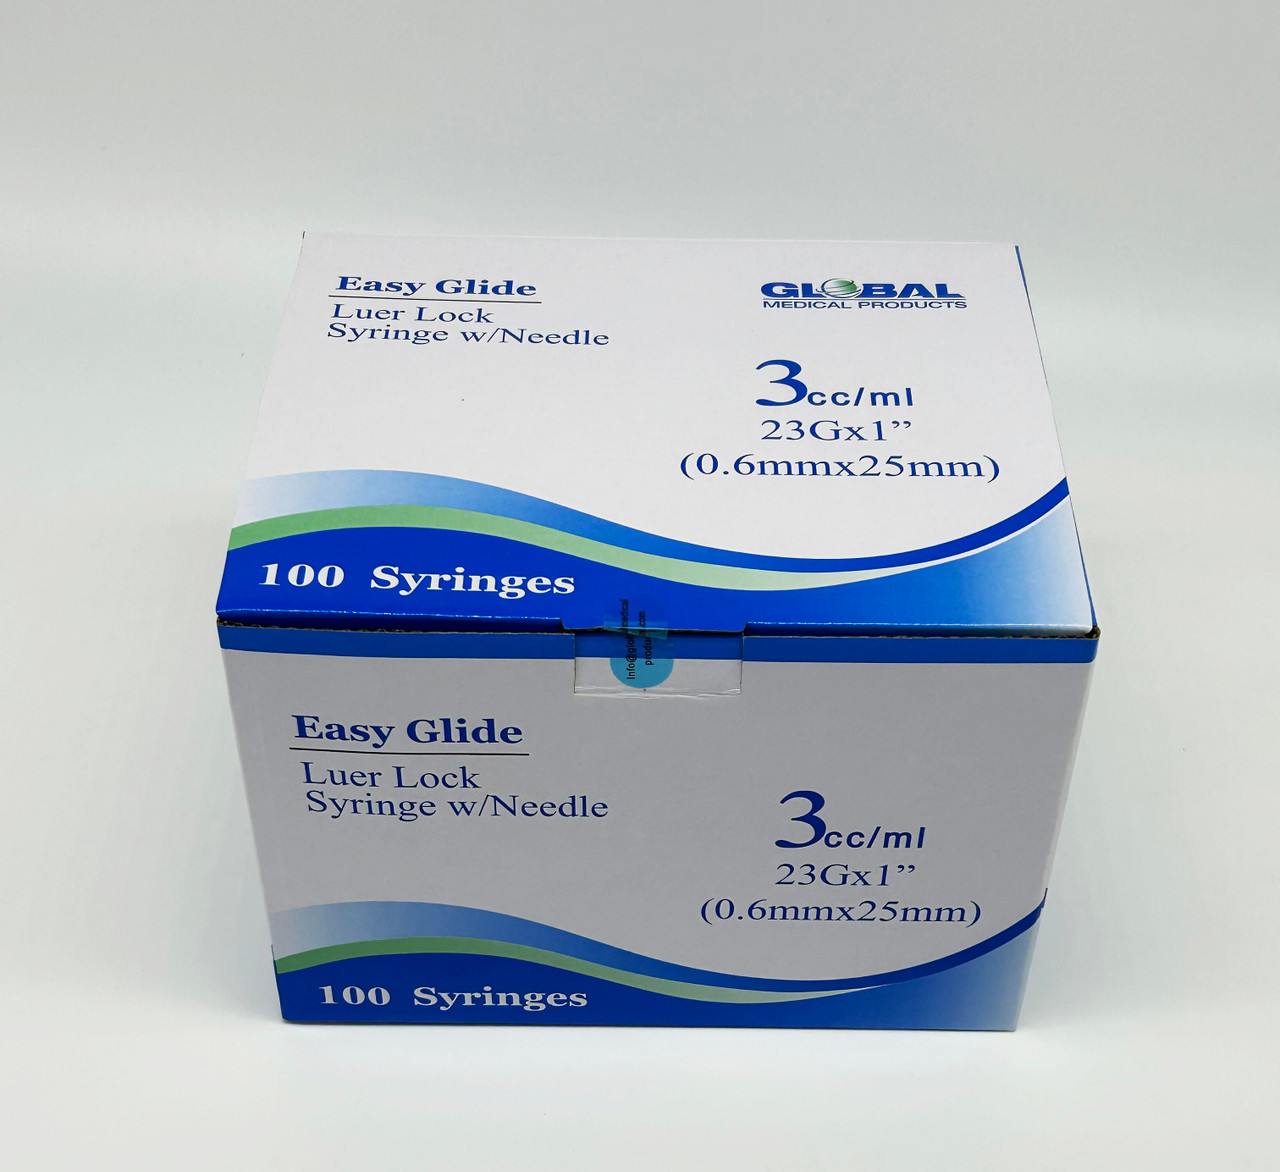 Easy Glide 3ml Syringes with 23g x 1 Hypodermic Needles - Box of 100